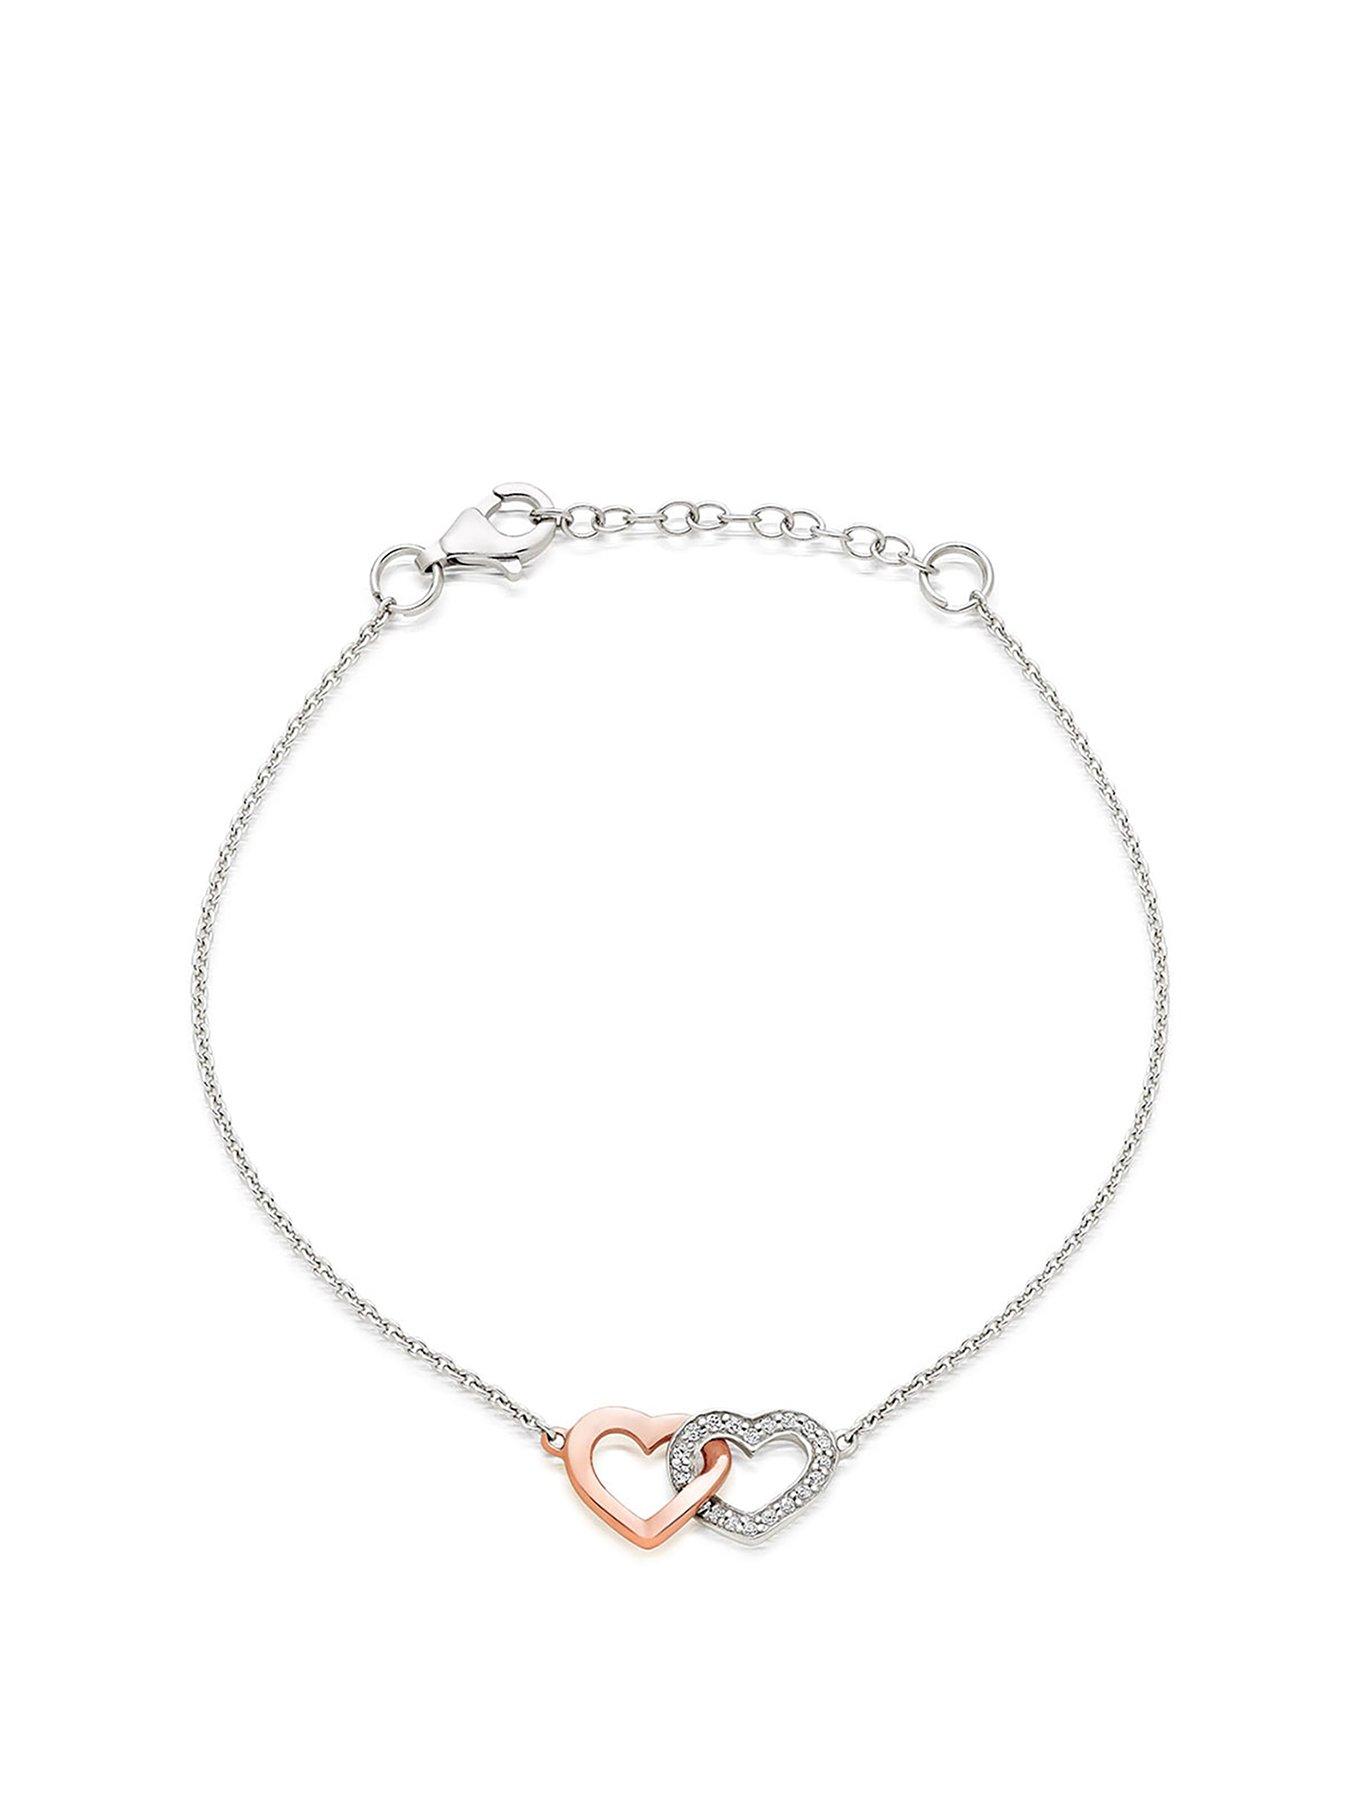  Silver and Rose Gold Plated Cubic Zirconia Double Heart Bracelet